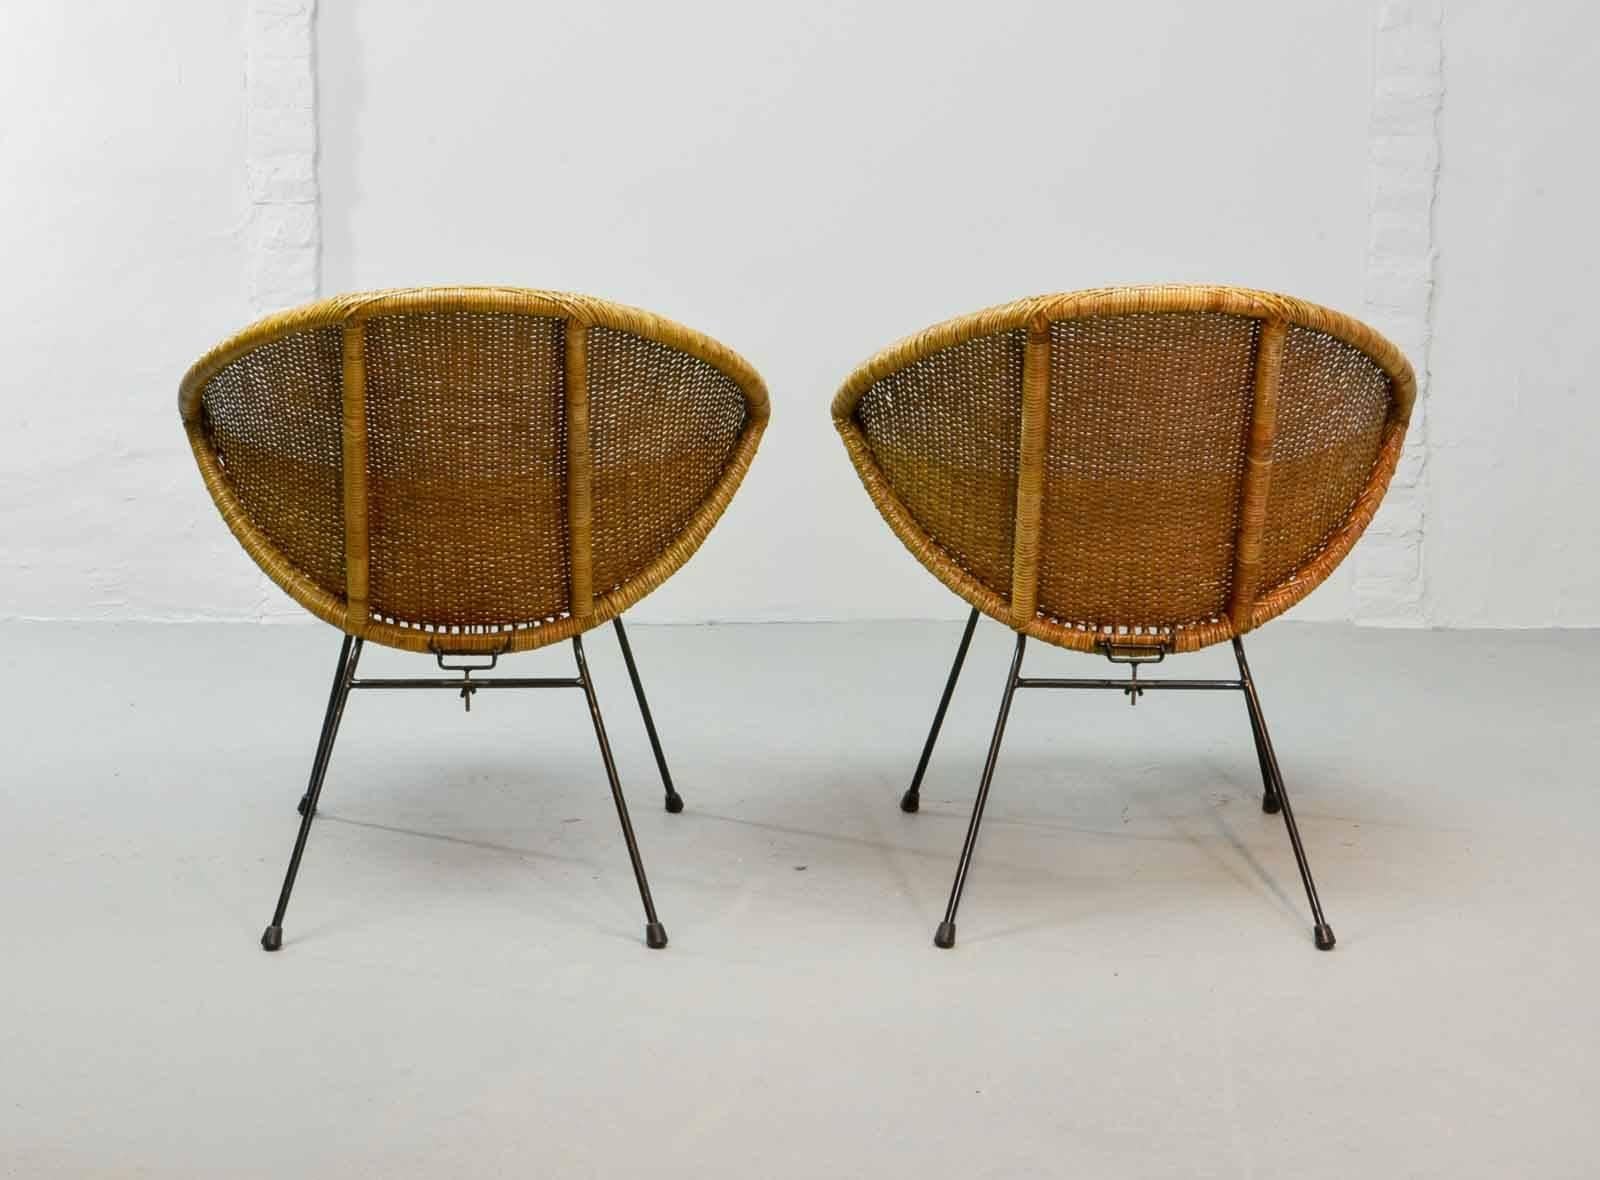 Dutch Stylish Pair of 1950 Circle Shaped Rattan Cocktail Chairs by Dirk Van Sliedregt